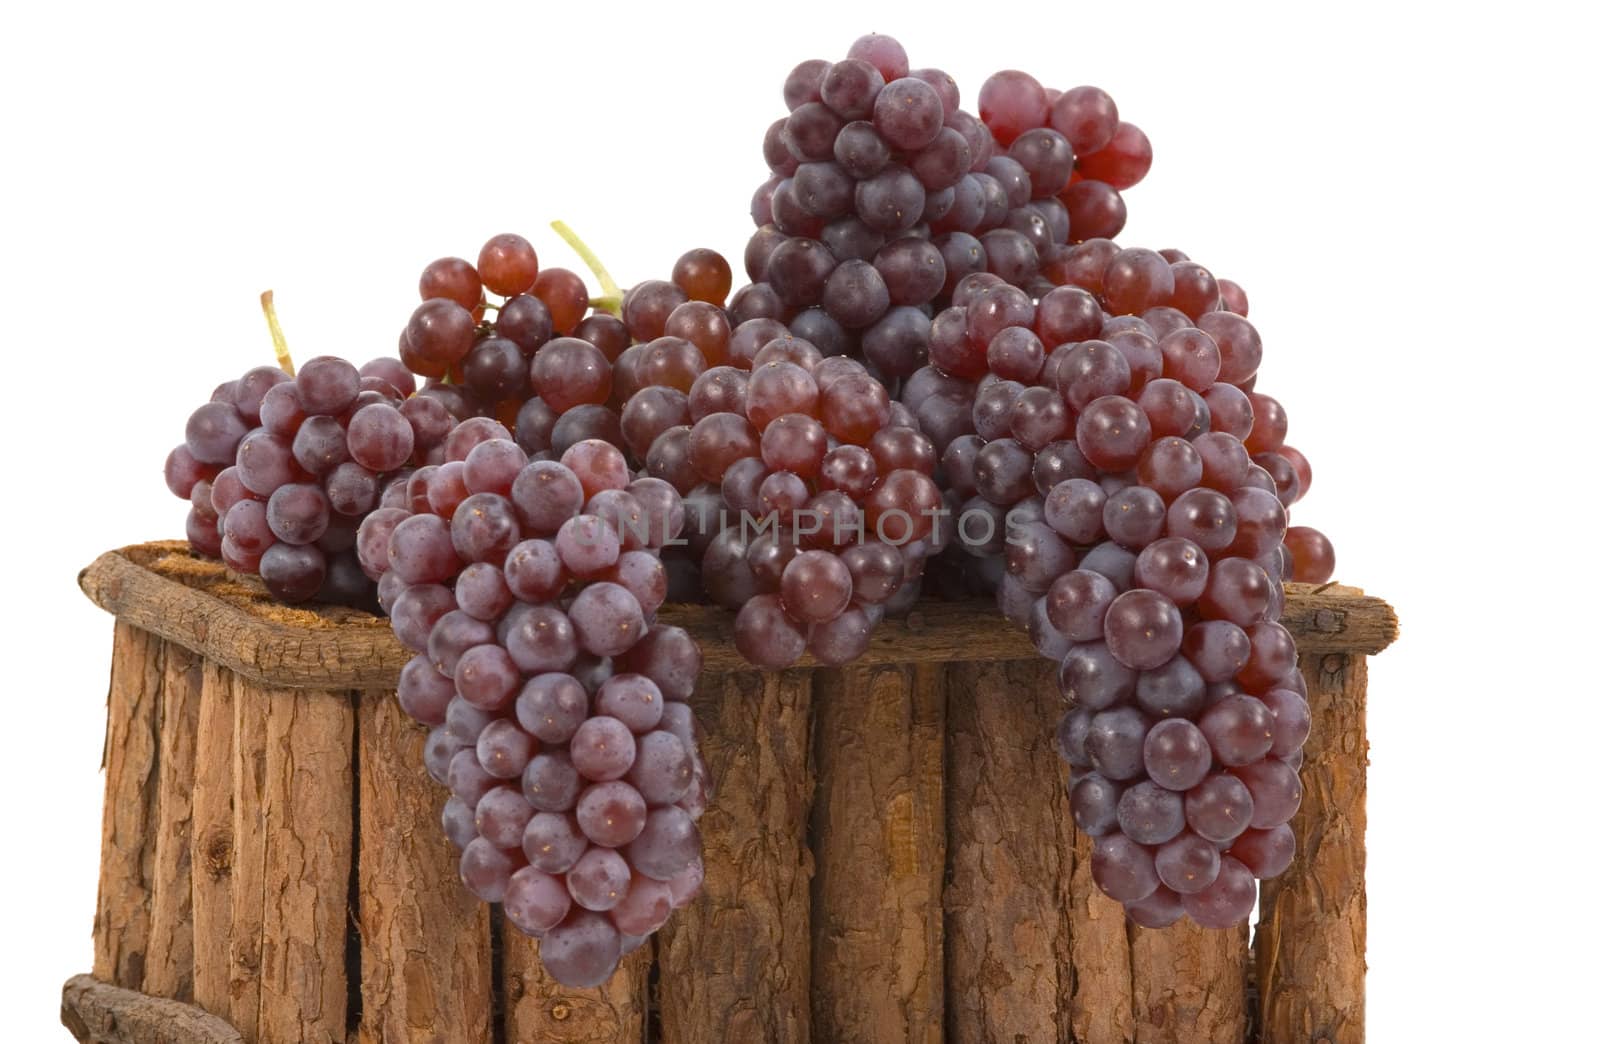 Gourmet champagne grapes in a basket